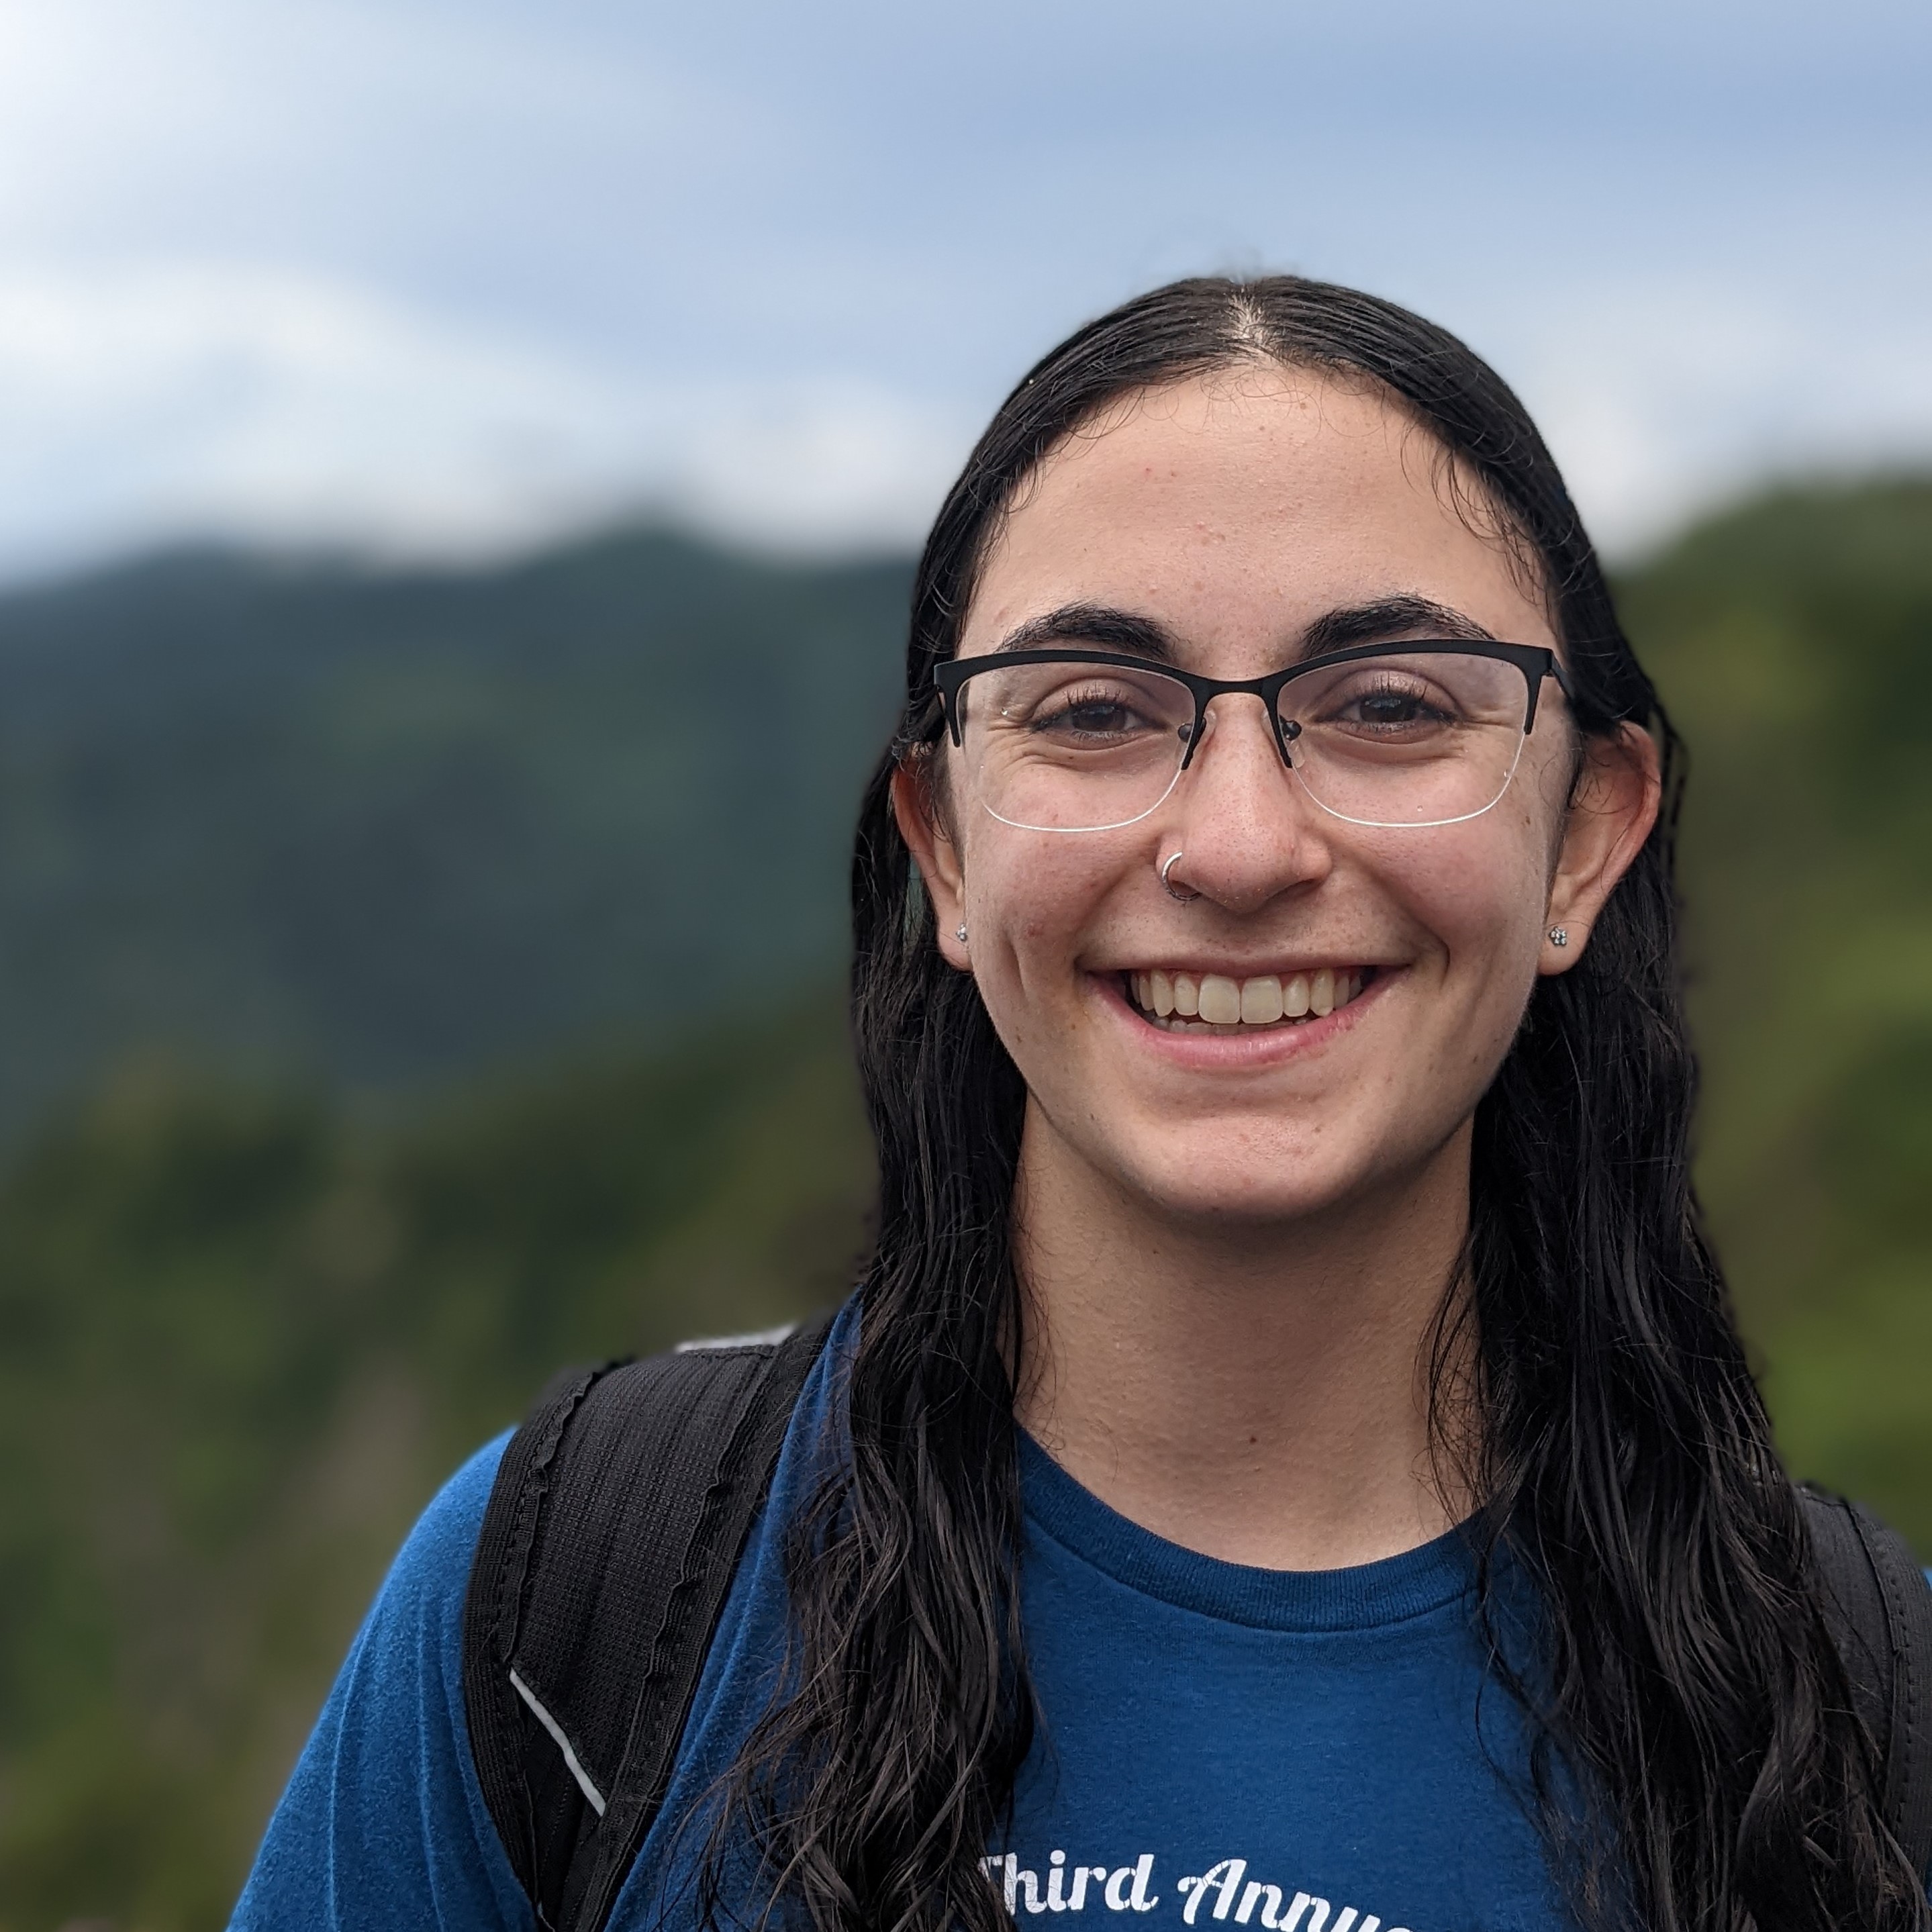 Talia is a third-year studying computer science and computer engineering. As a member of the AutoAquaponics software team, she works on the system's web app. She joined ESWNU because of the opportunity to collaborate on a project at the intersection of technology and sustainability.LINKEDINLINKhttps://www.linkedin.com/in/talia-ben-naim